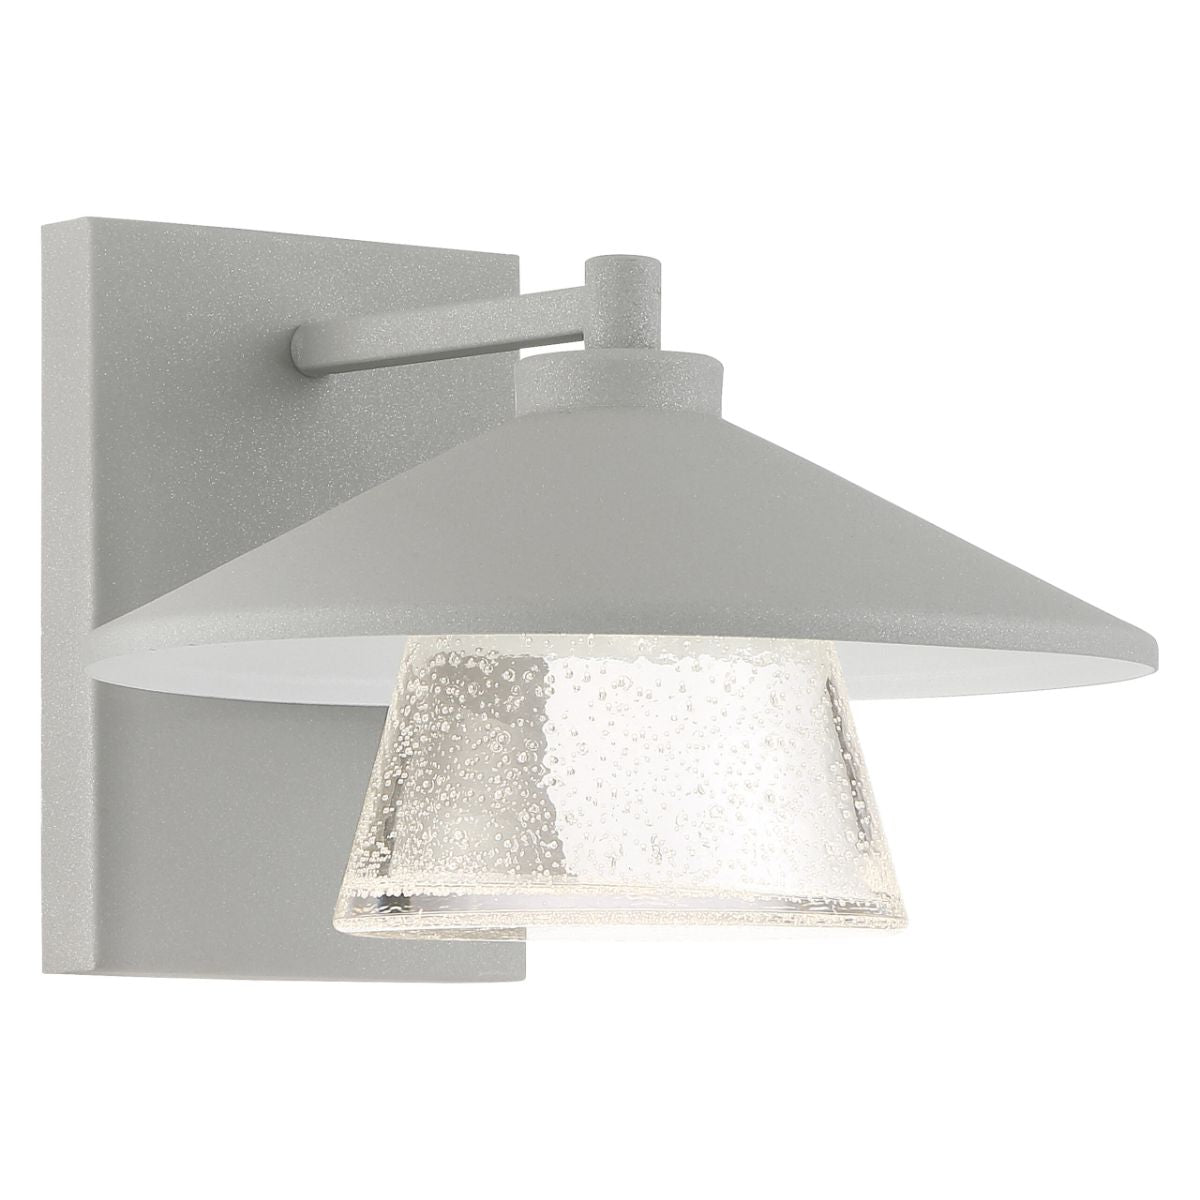 Silo 10 in. LED Outdoor Wall Sconce 3000K - Bees Lighting